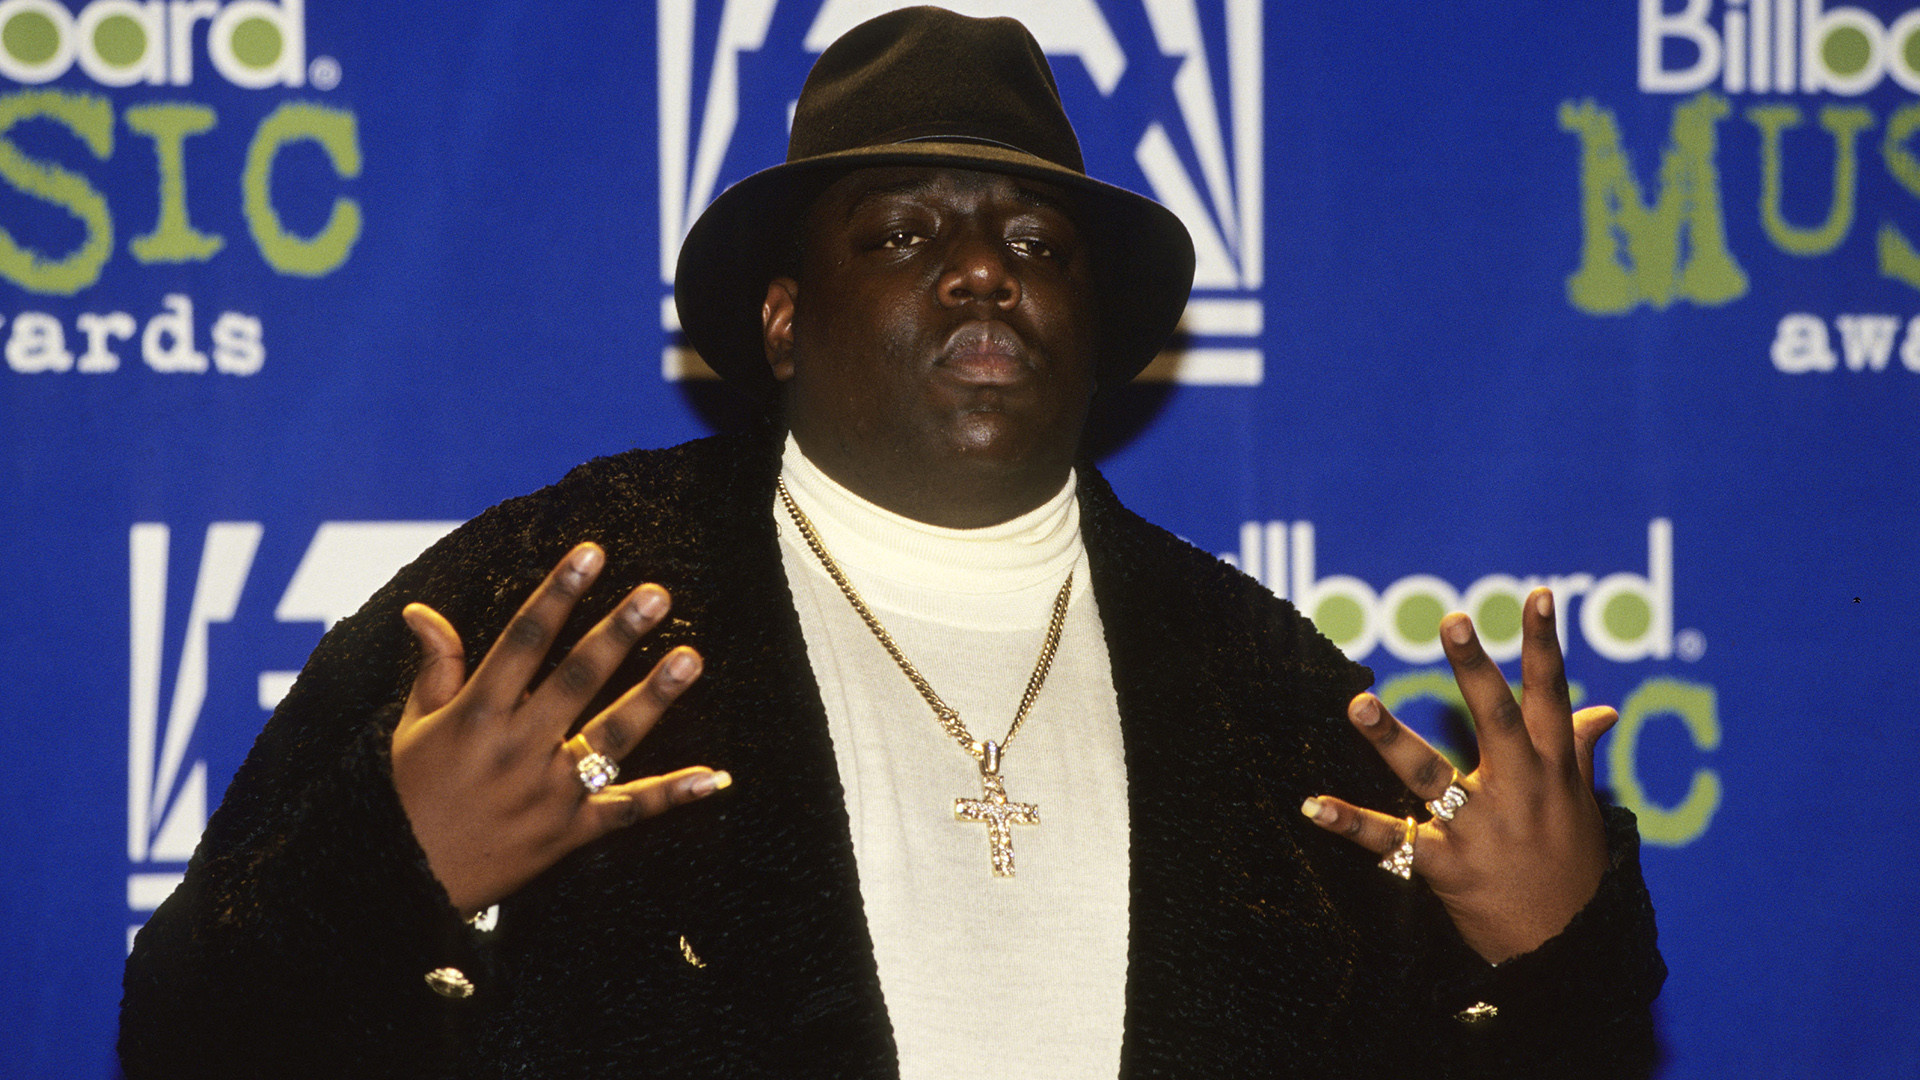 The Notorious Big Wallpaper (62+ pictures)